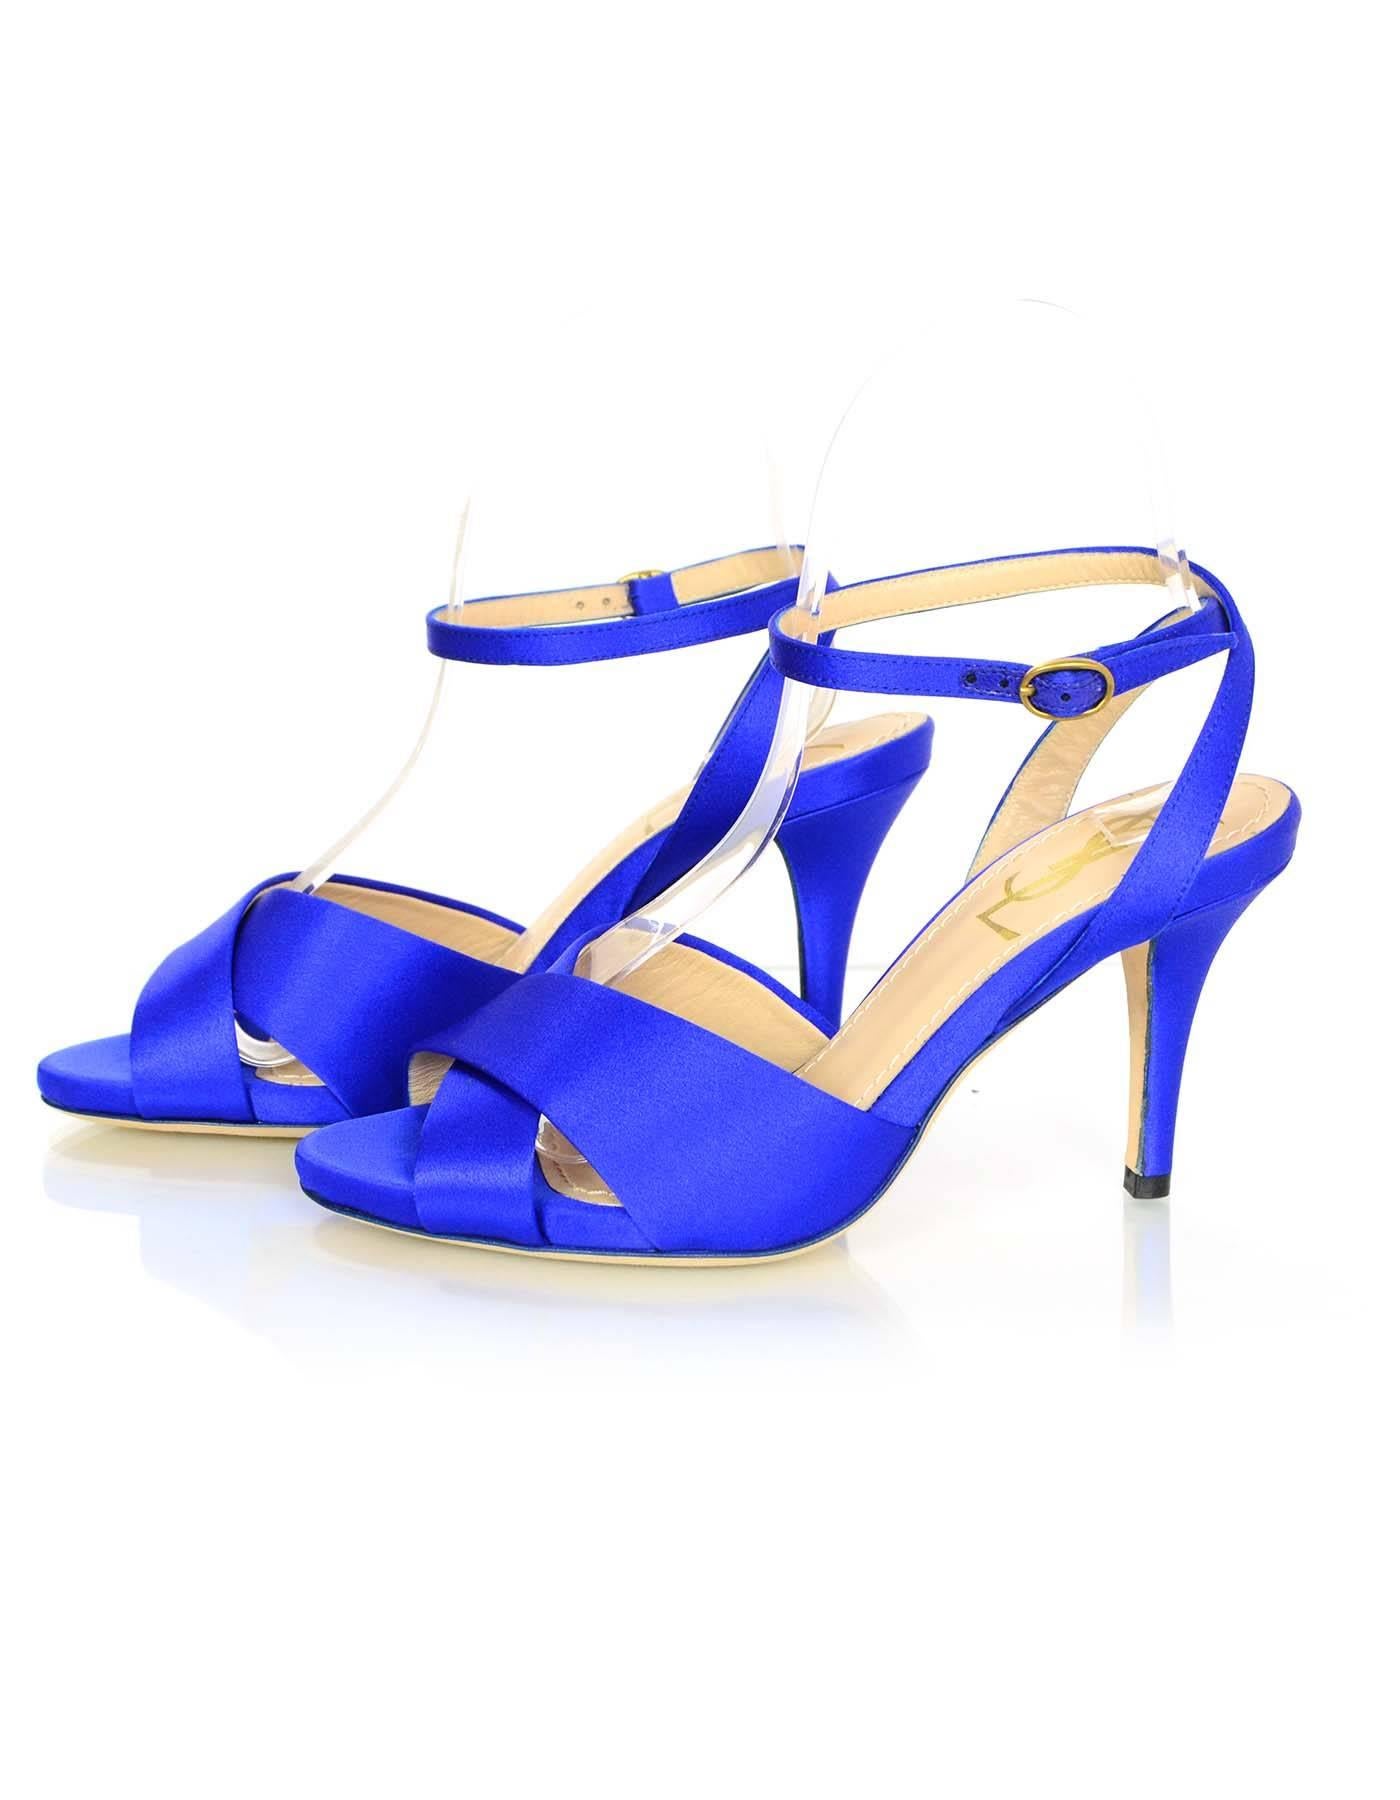 YSL Blue Satin Ankle Strap Sandals Sz 35

Made In: Italy
Color: Blue
Materials: Satin
Closure/Opening: Ankle buckle and notch closure
Sole Stamp: Yves Saint Laurent Made in Italy 35
Overall Condition: Excellent pre-owned condition with the